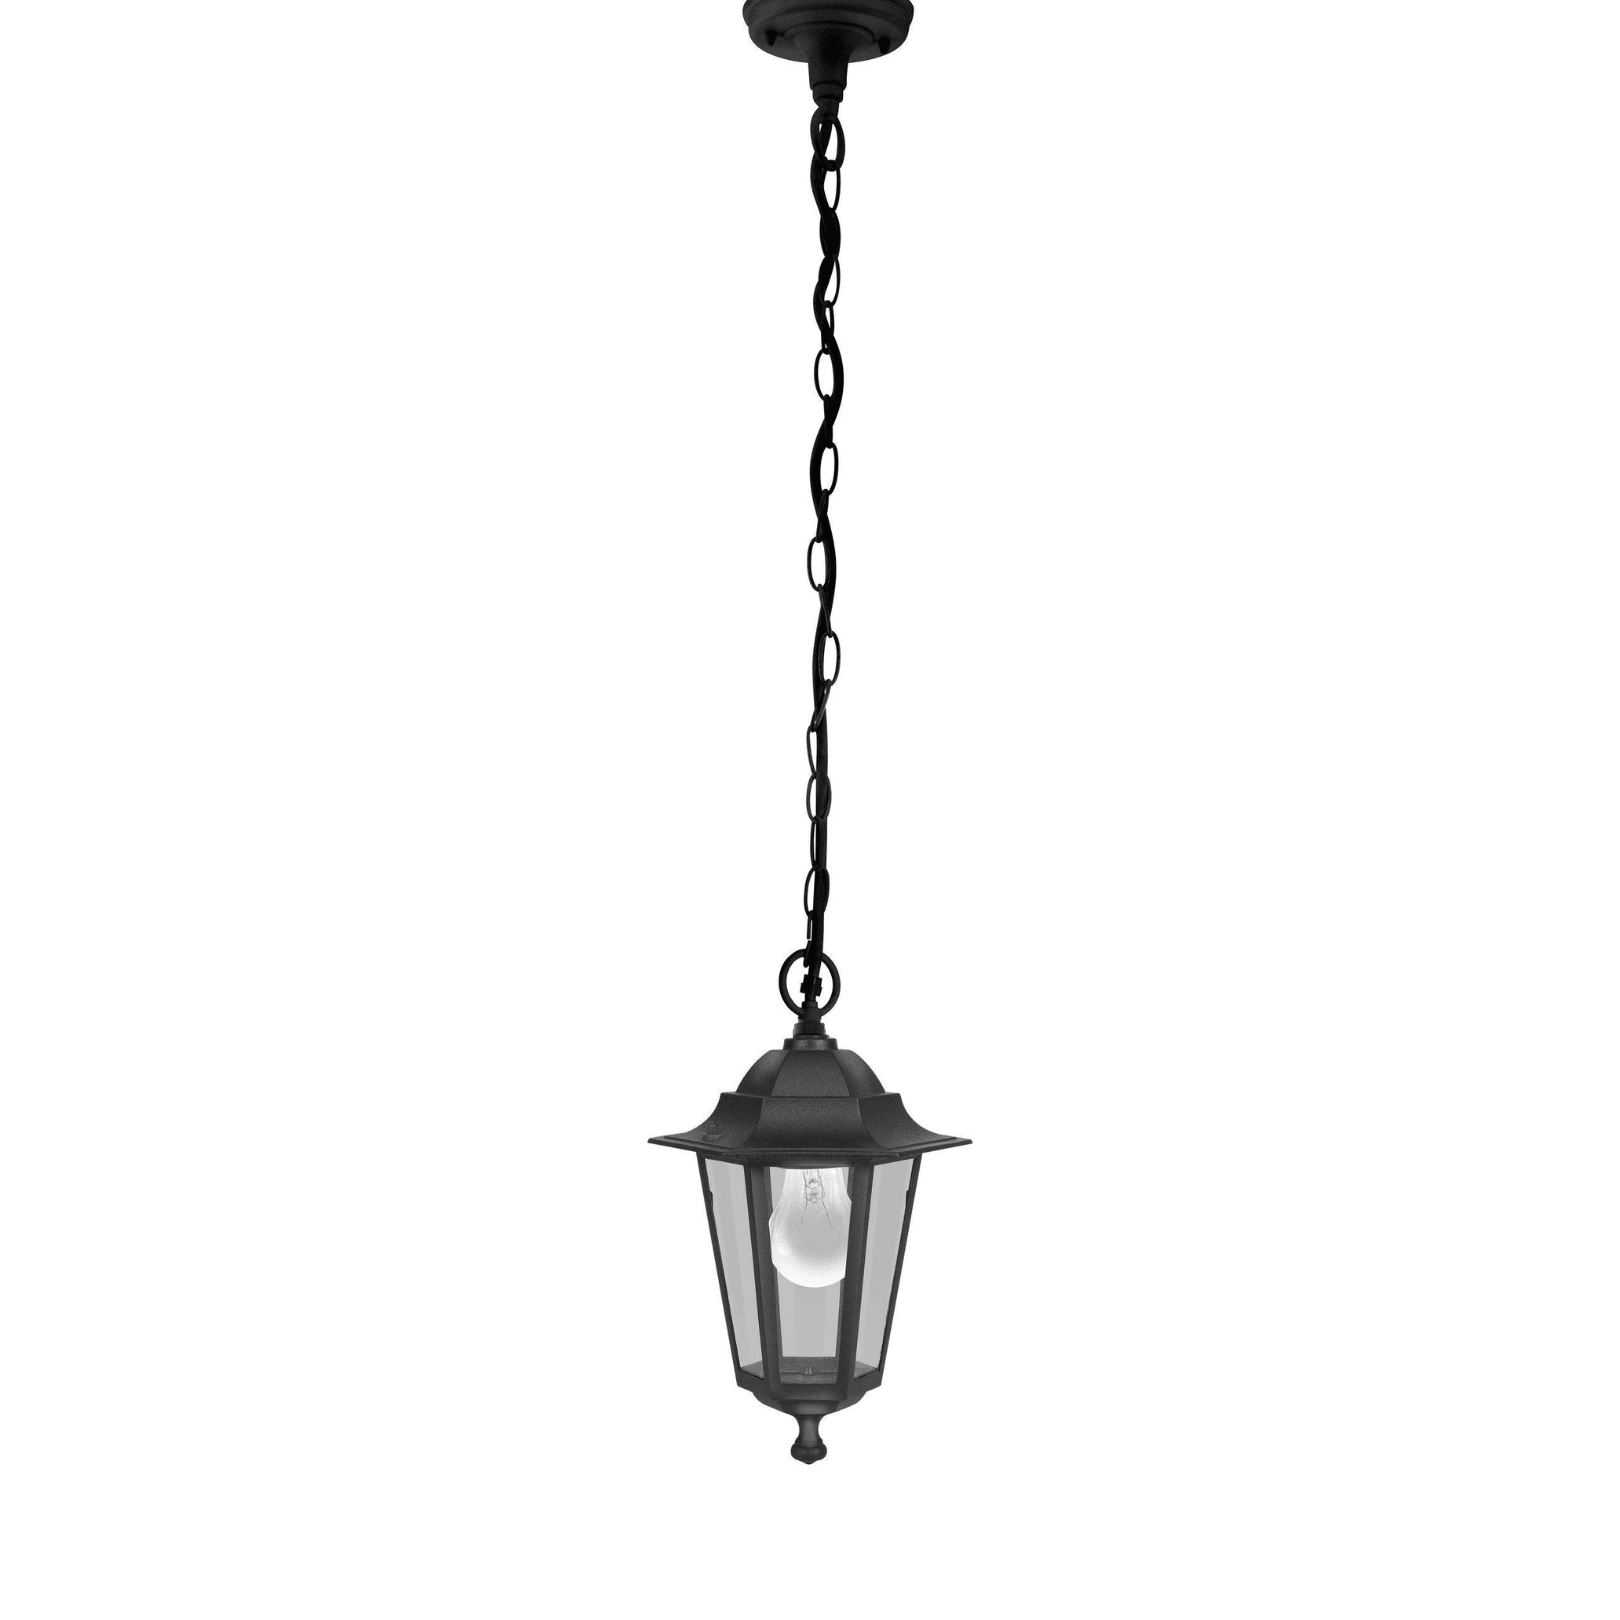 LATERNA Outdoor Hanging Light by The Light Library